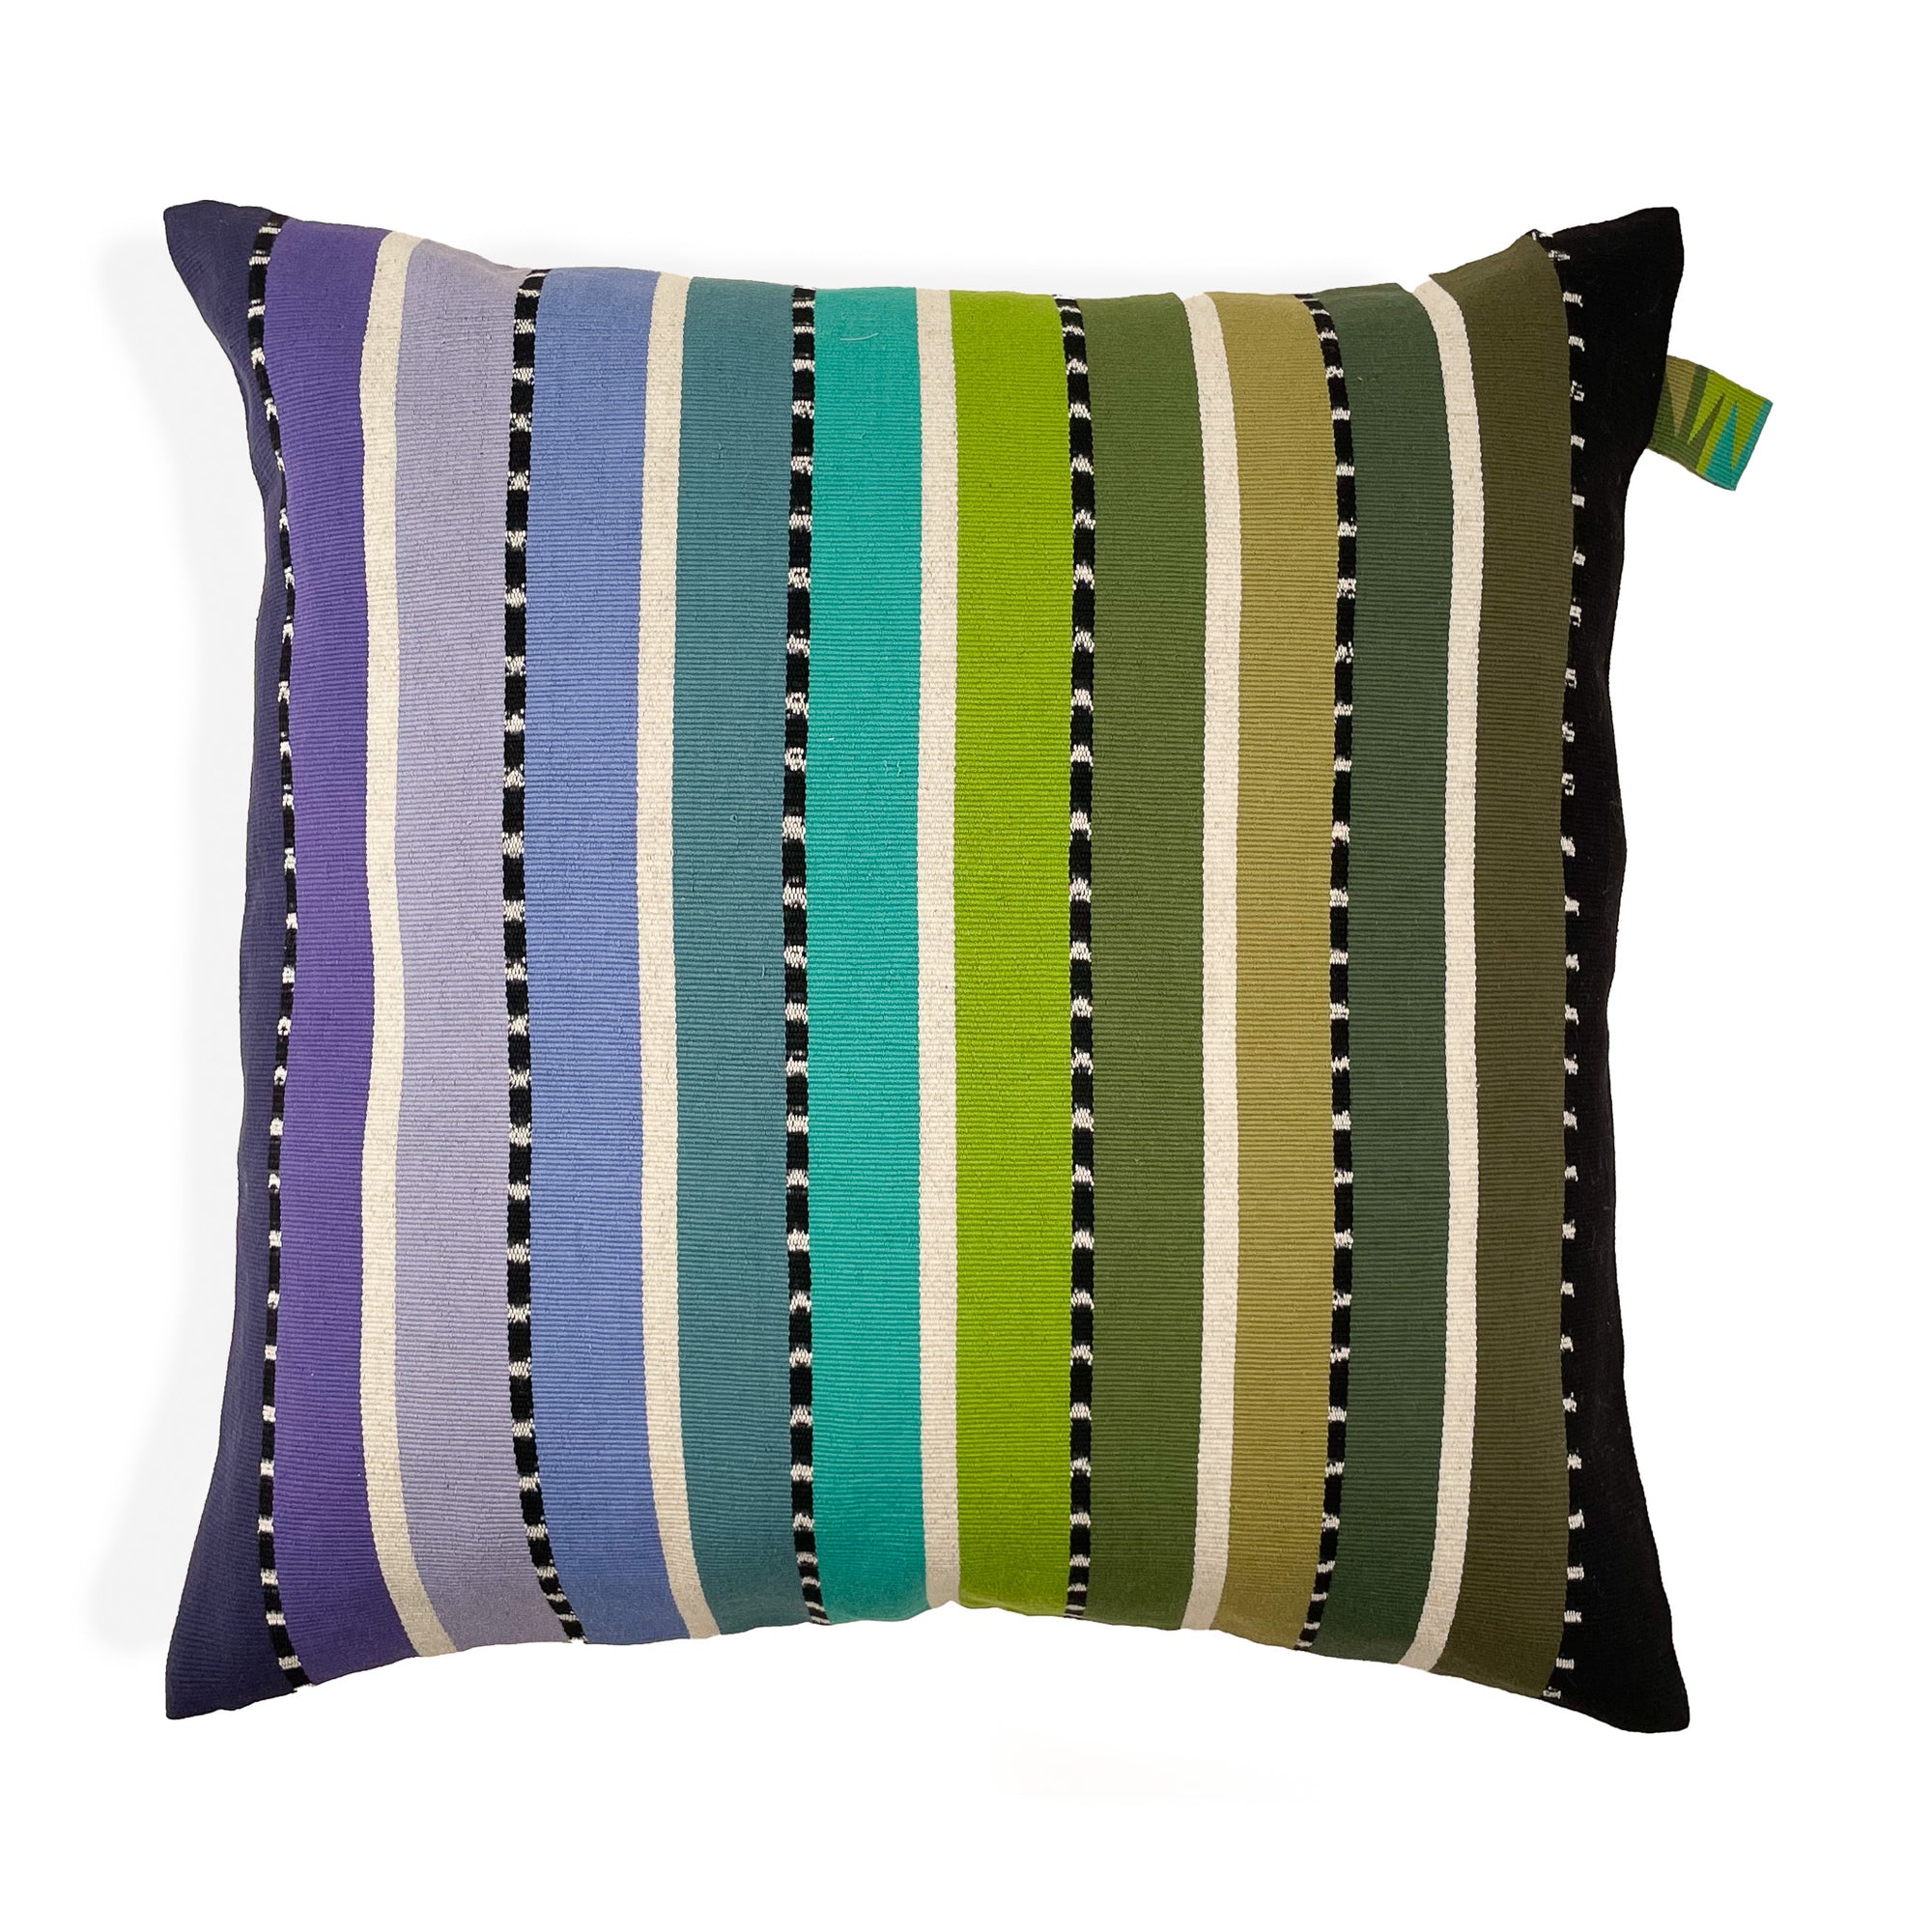 Front of cushion with colorful stripes grading from purple, blue, teal, green, to black